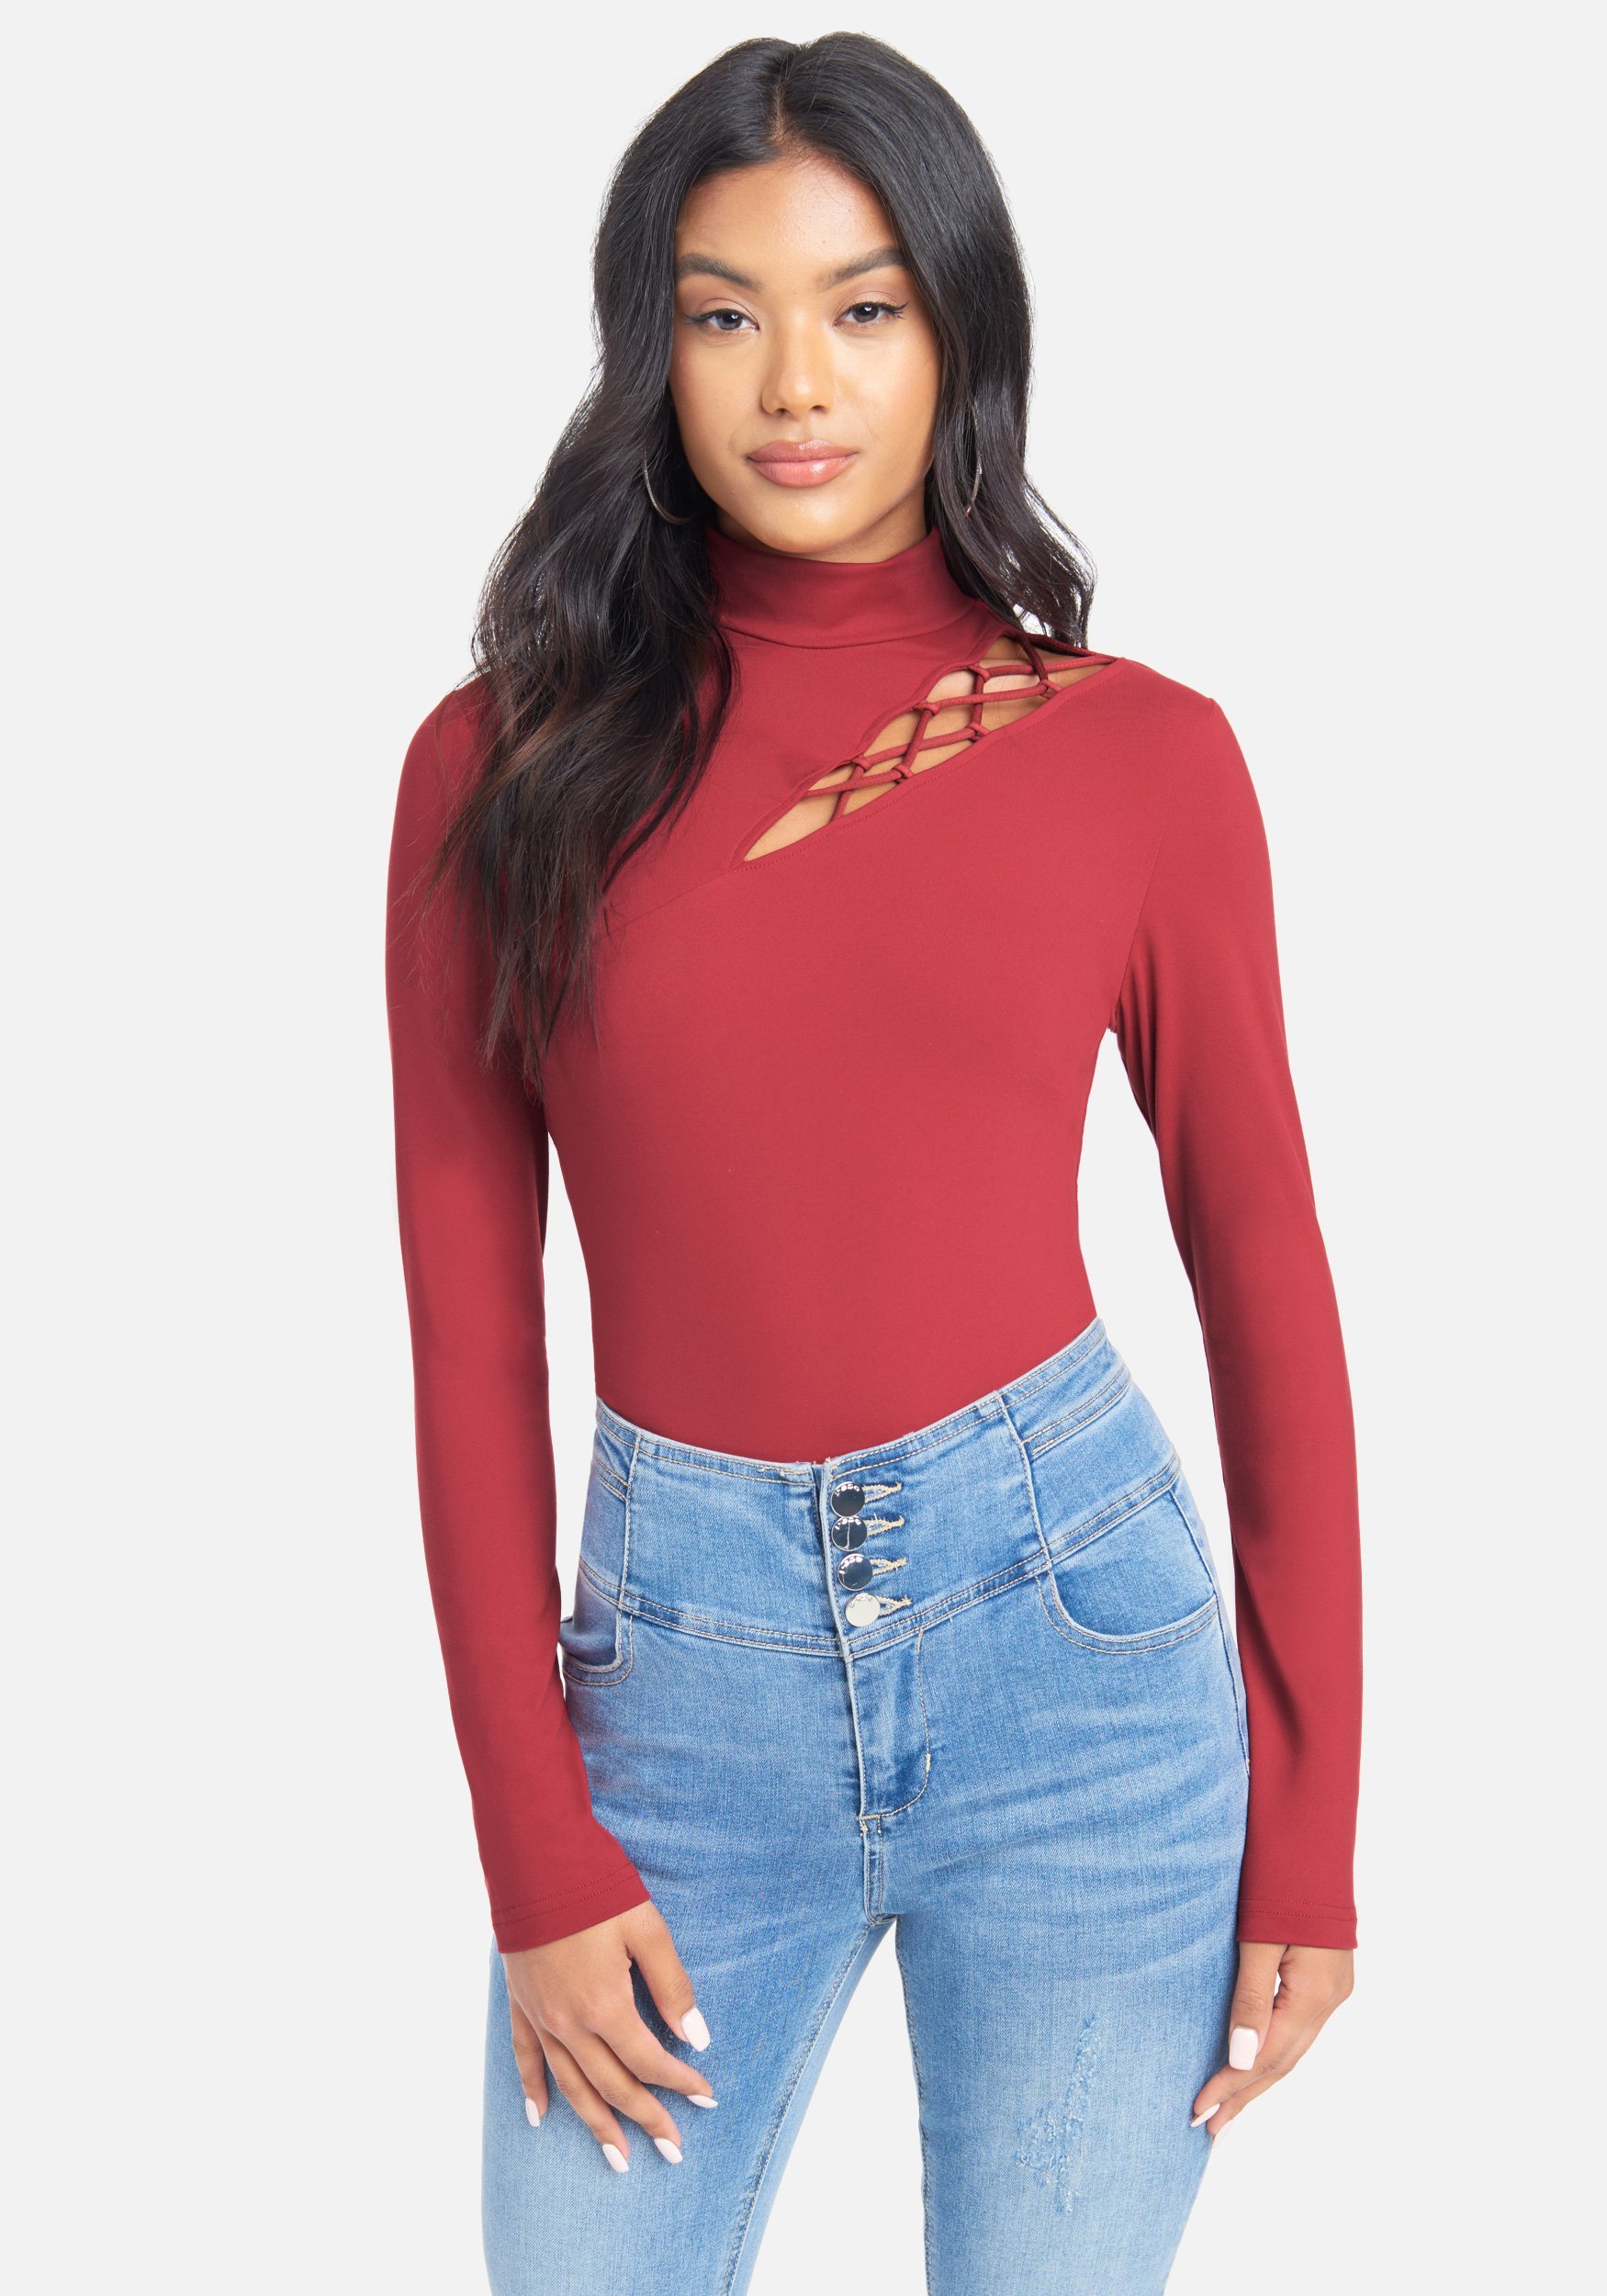 Bebe Women's Mock Neck Cut Out Knit Top, Size Large in Rio Red Spandex